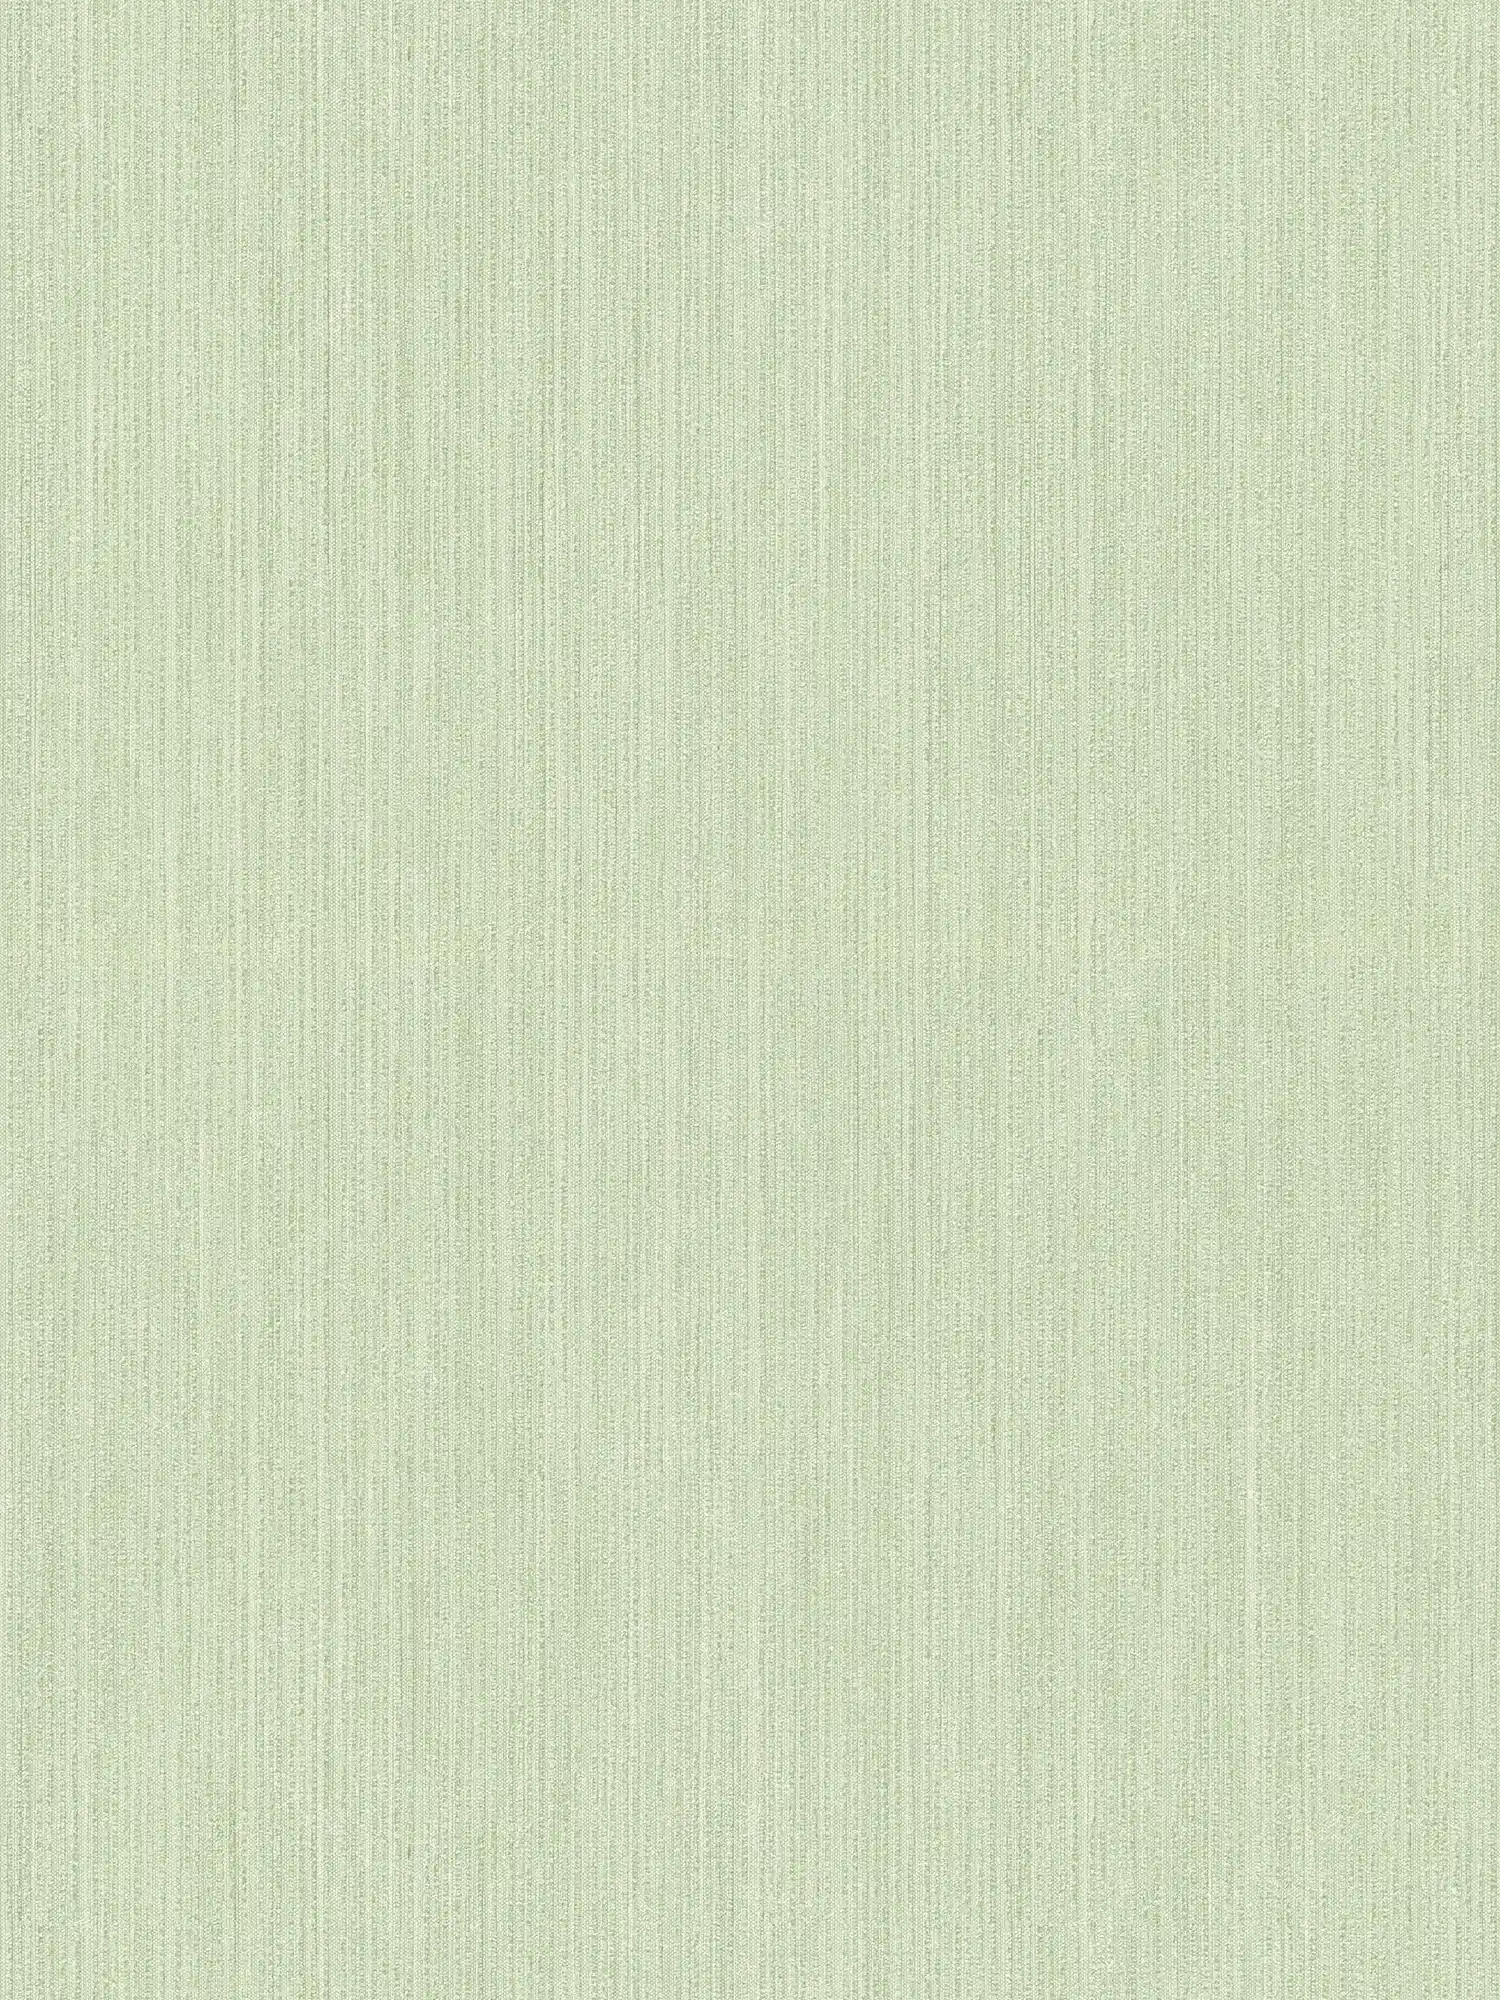 MICHALSKY plain wallpaper with mottled colour structure - green
